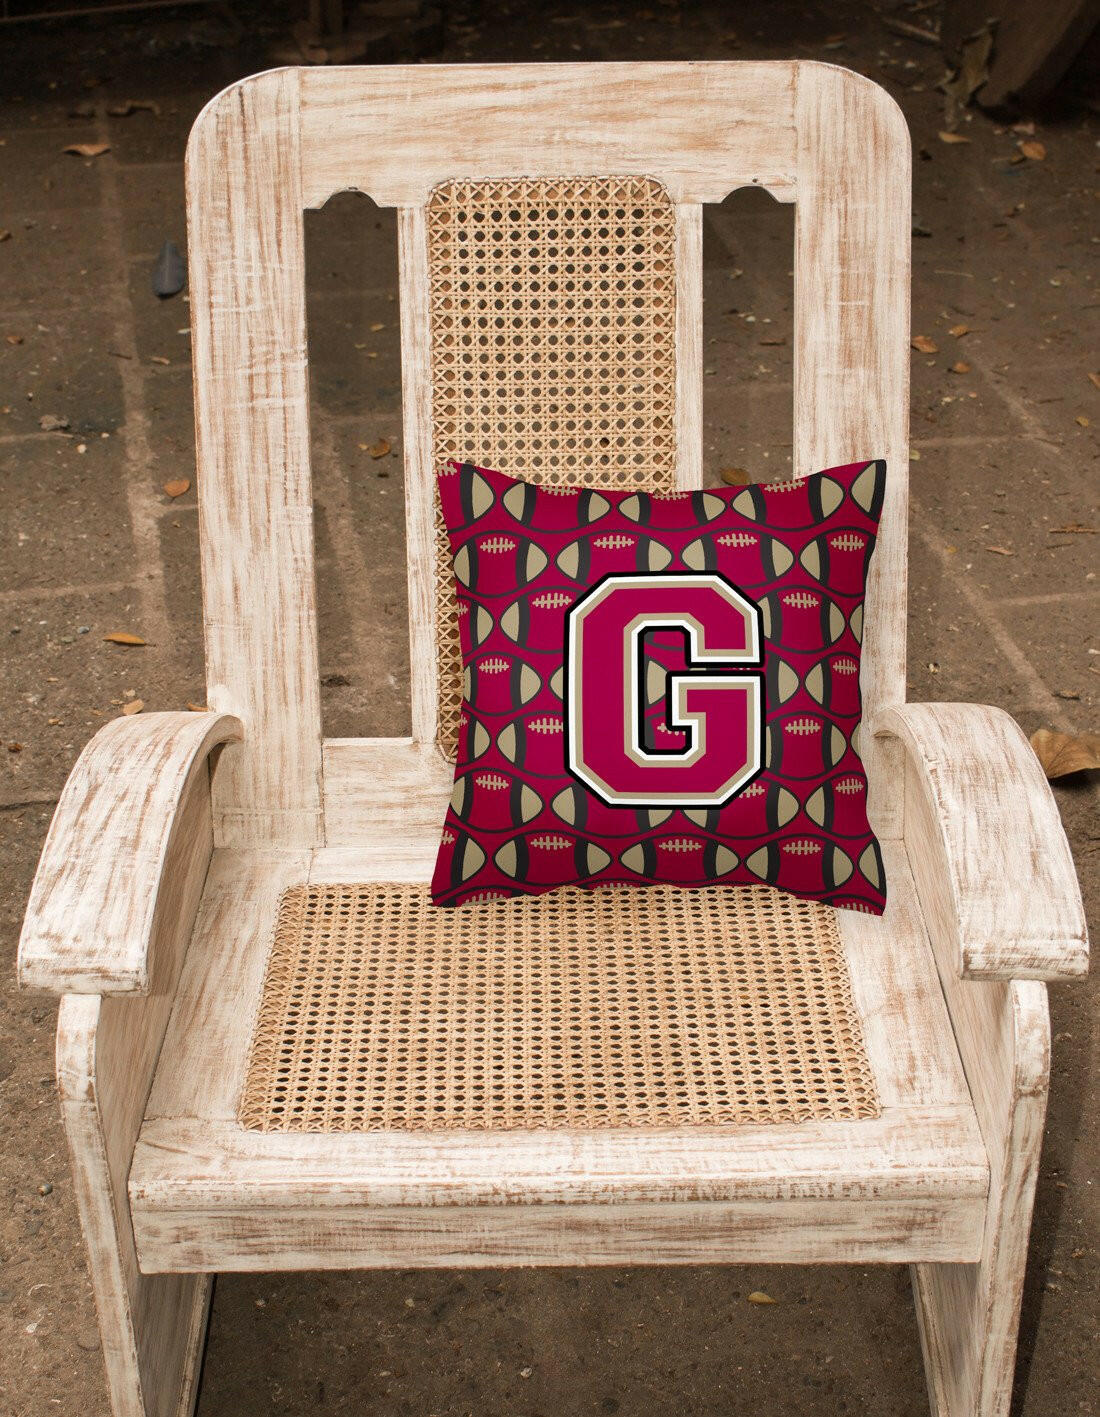 Letter G Football Garnet and Gold Fabric Decorative Pillow CJ1078-GPW1414 by Caroline's Treasures